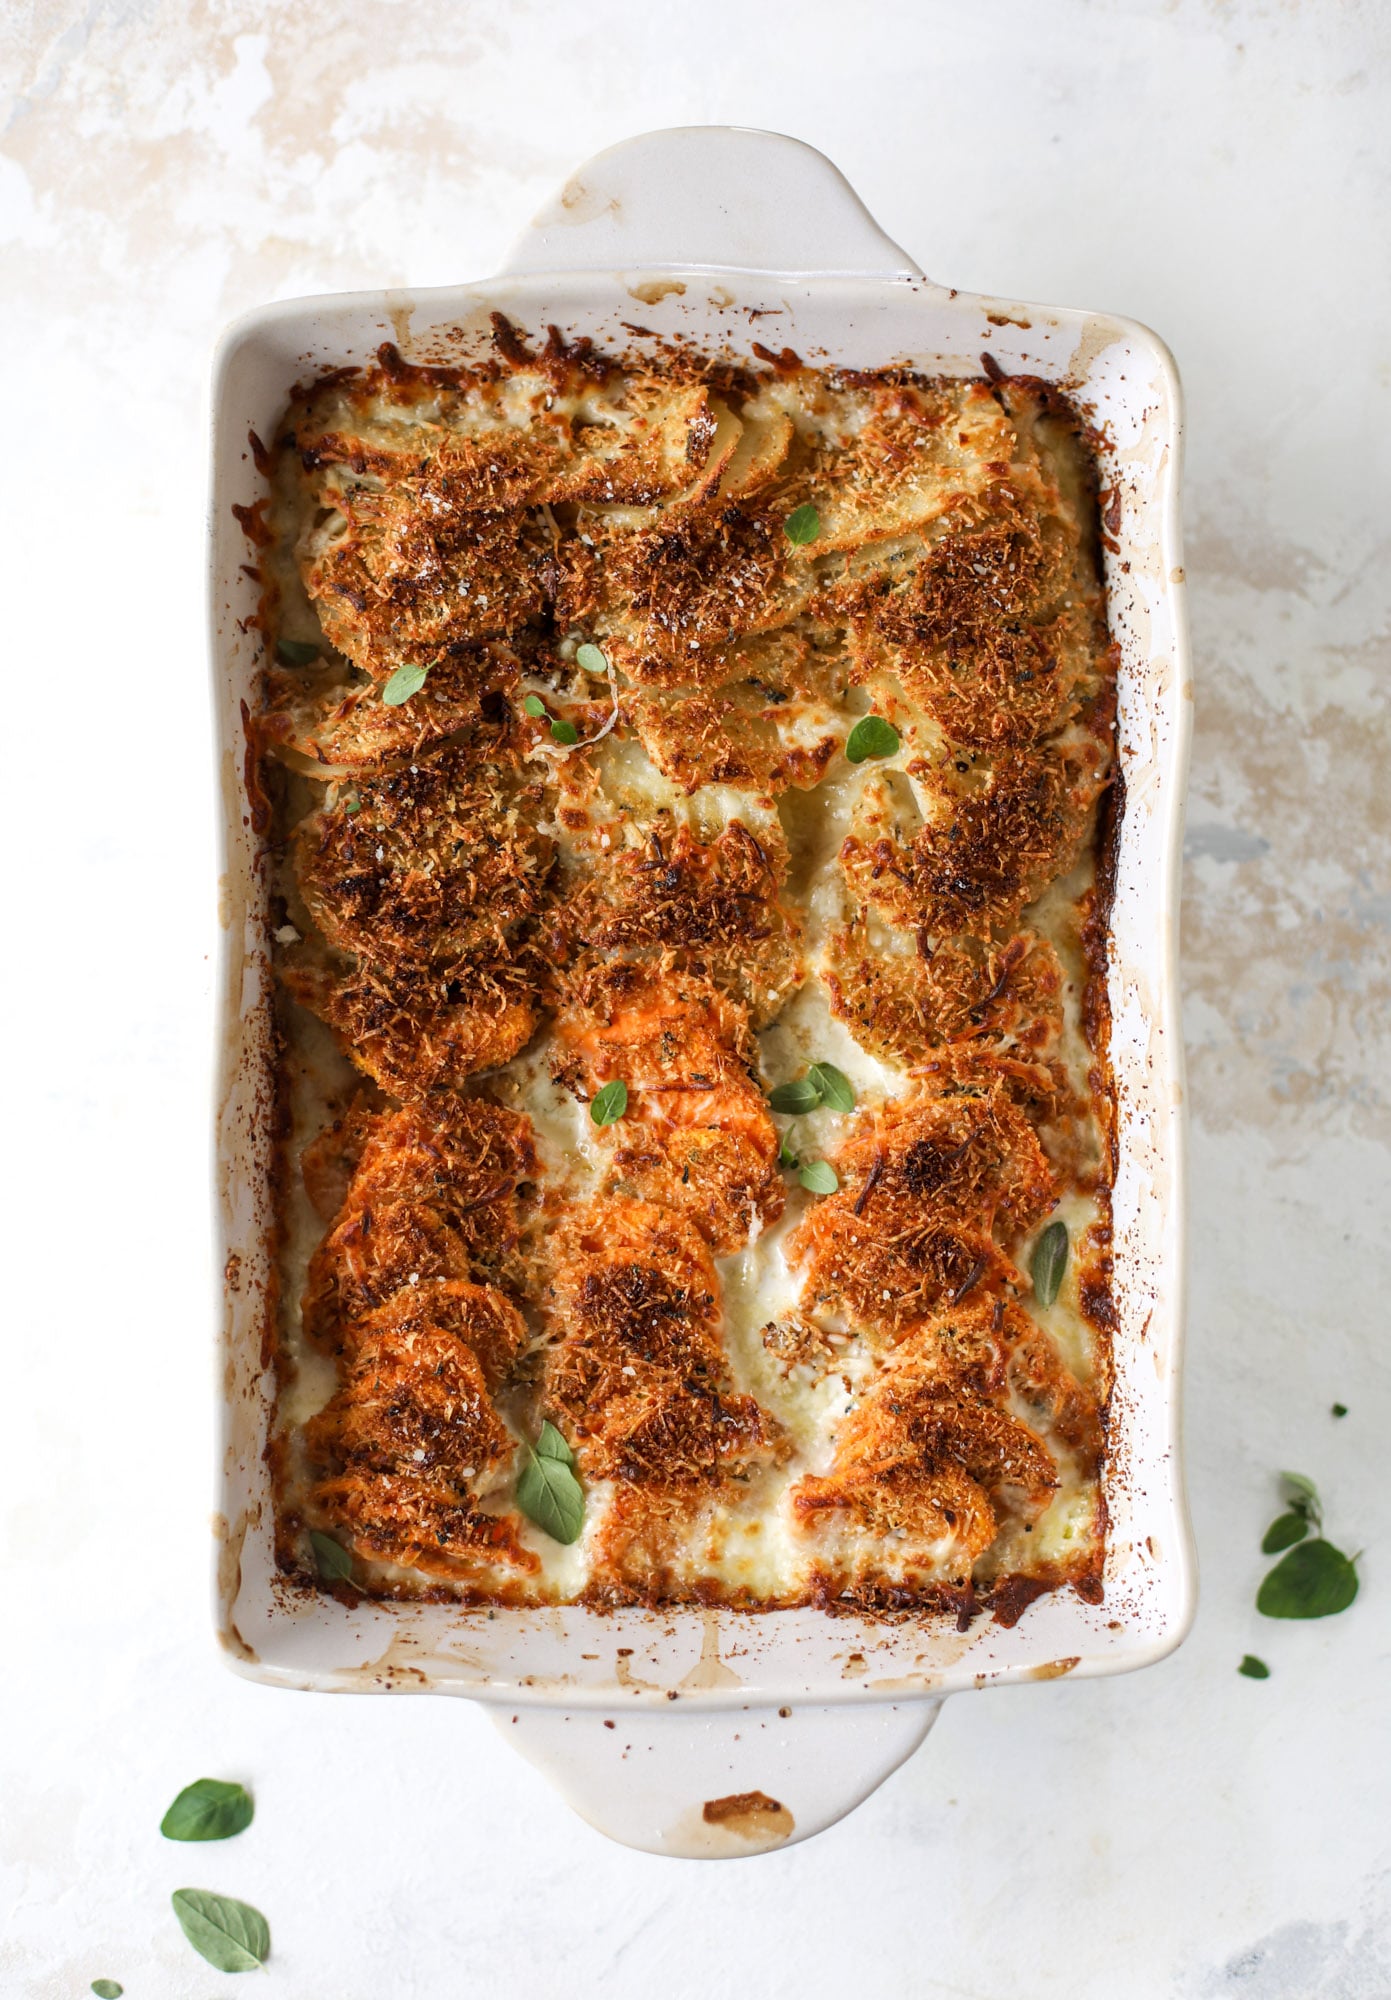 These scalloped potatoes are a cheese lover's dream. Sharp asiago and cream envelops idaho and sweet potatoes in these scalloped potatoes to please everyone! The crunchy asiago topping is irresistible. I howsweeteats.com #scalloped #potatoes